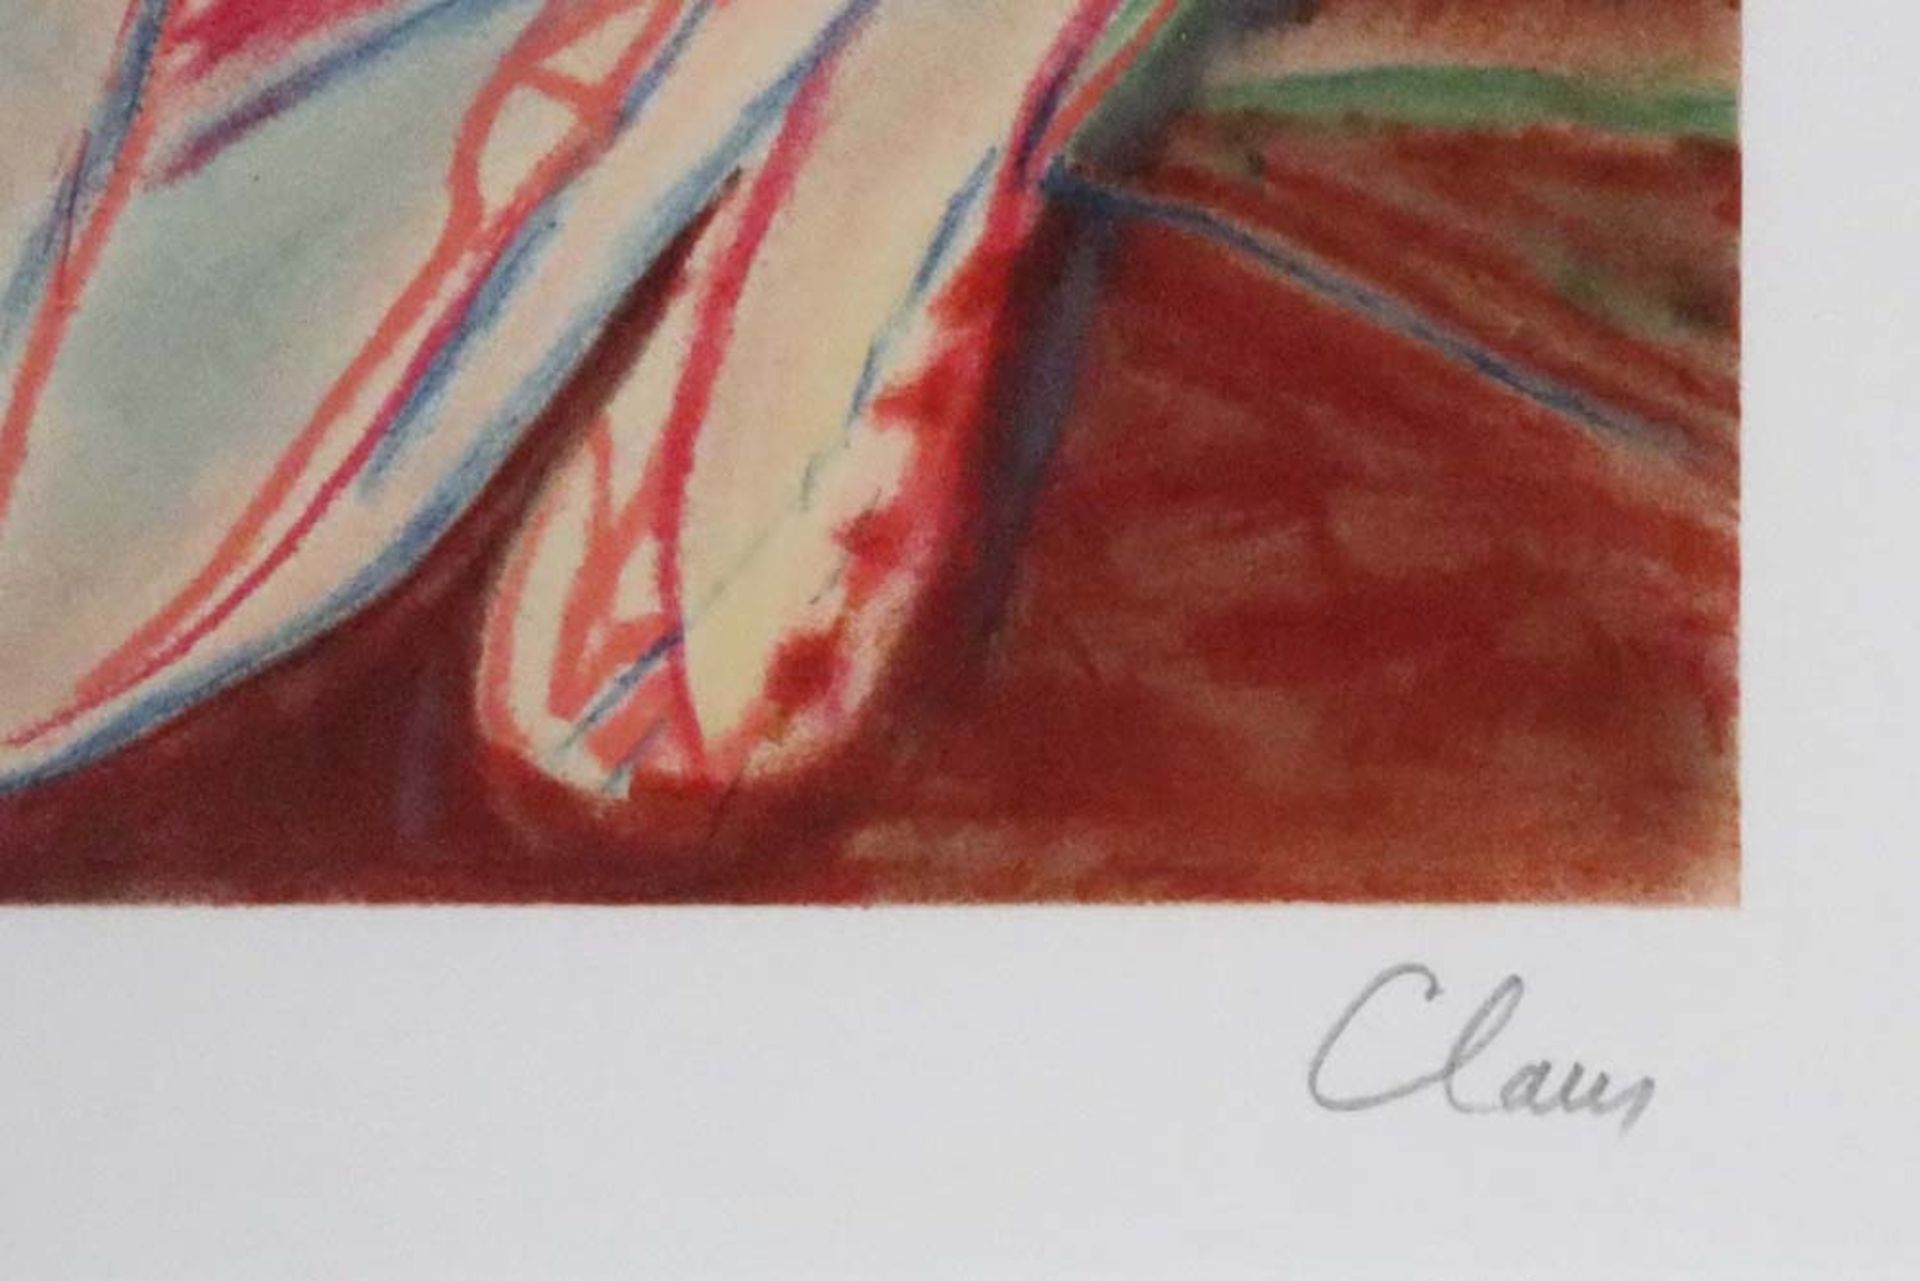 lithograph printed in colors - signed Hugo Claus || CLAUS HUGO (1929 - 2008) kleurlitho n° 491/500 : - Image 2 of 3